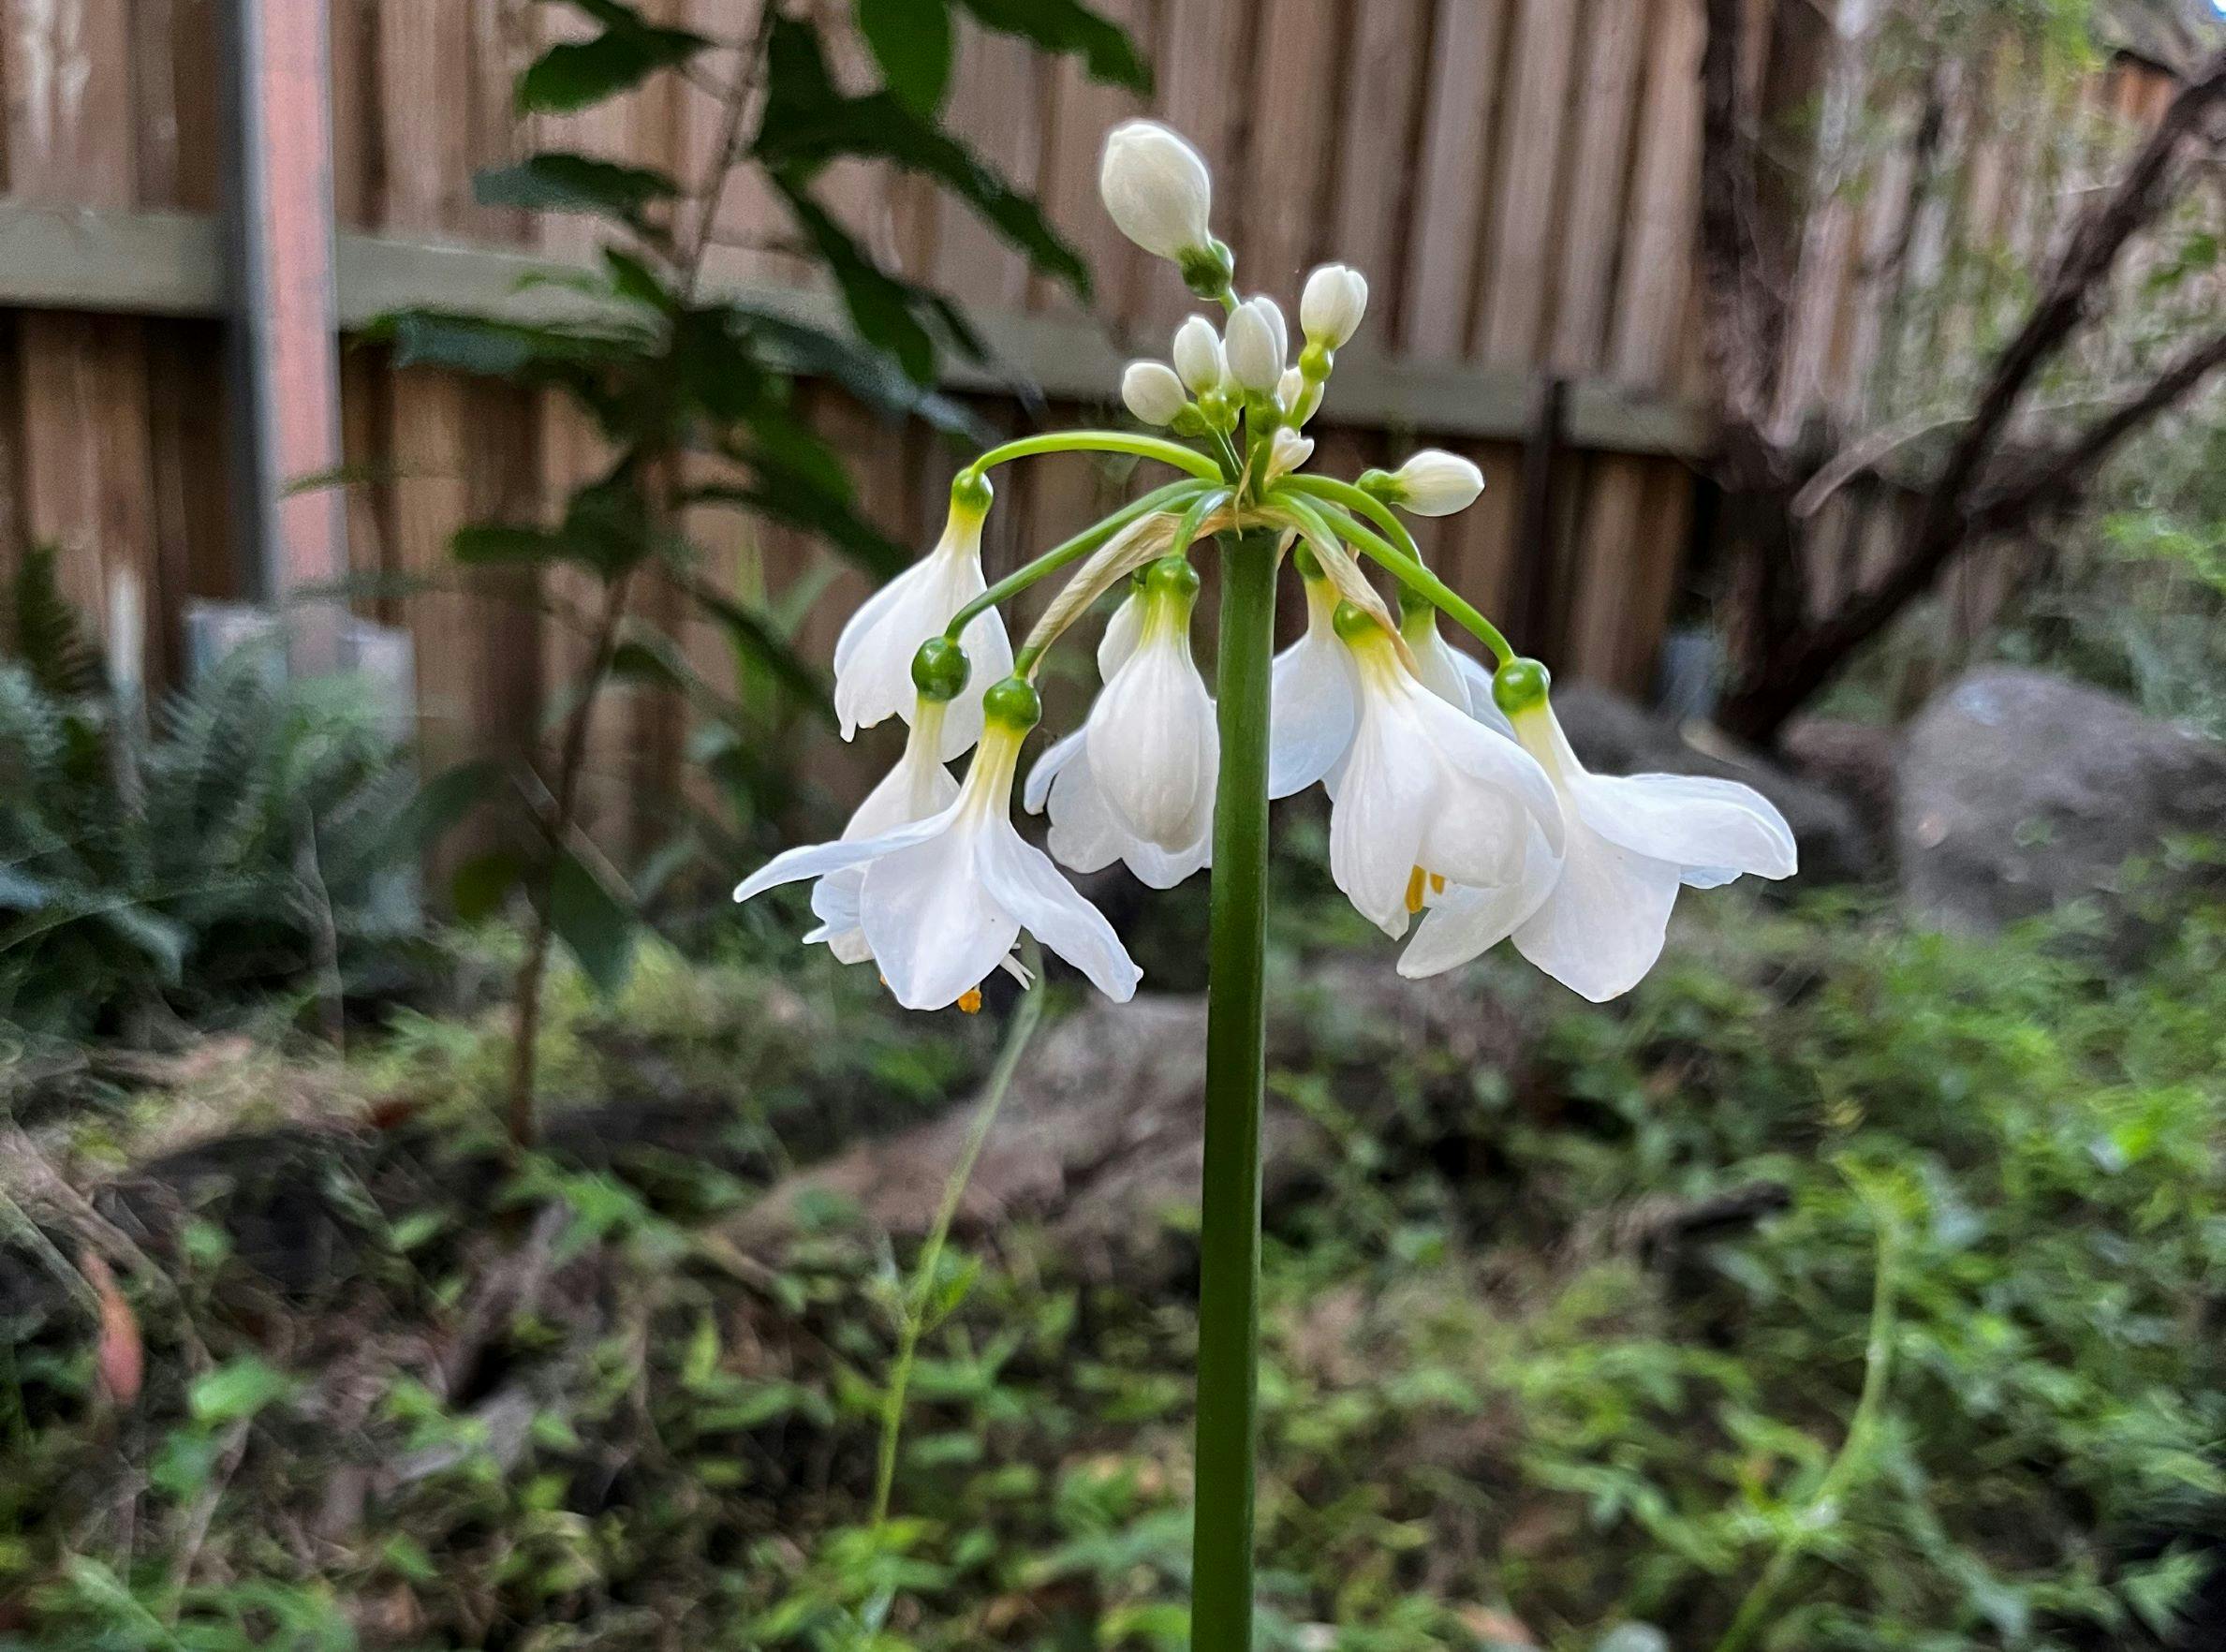 Brisbane Lily. White flowers with blurred green leaves in background. 